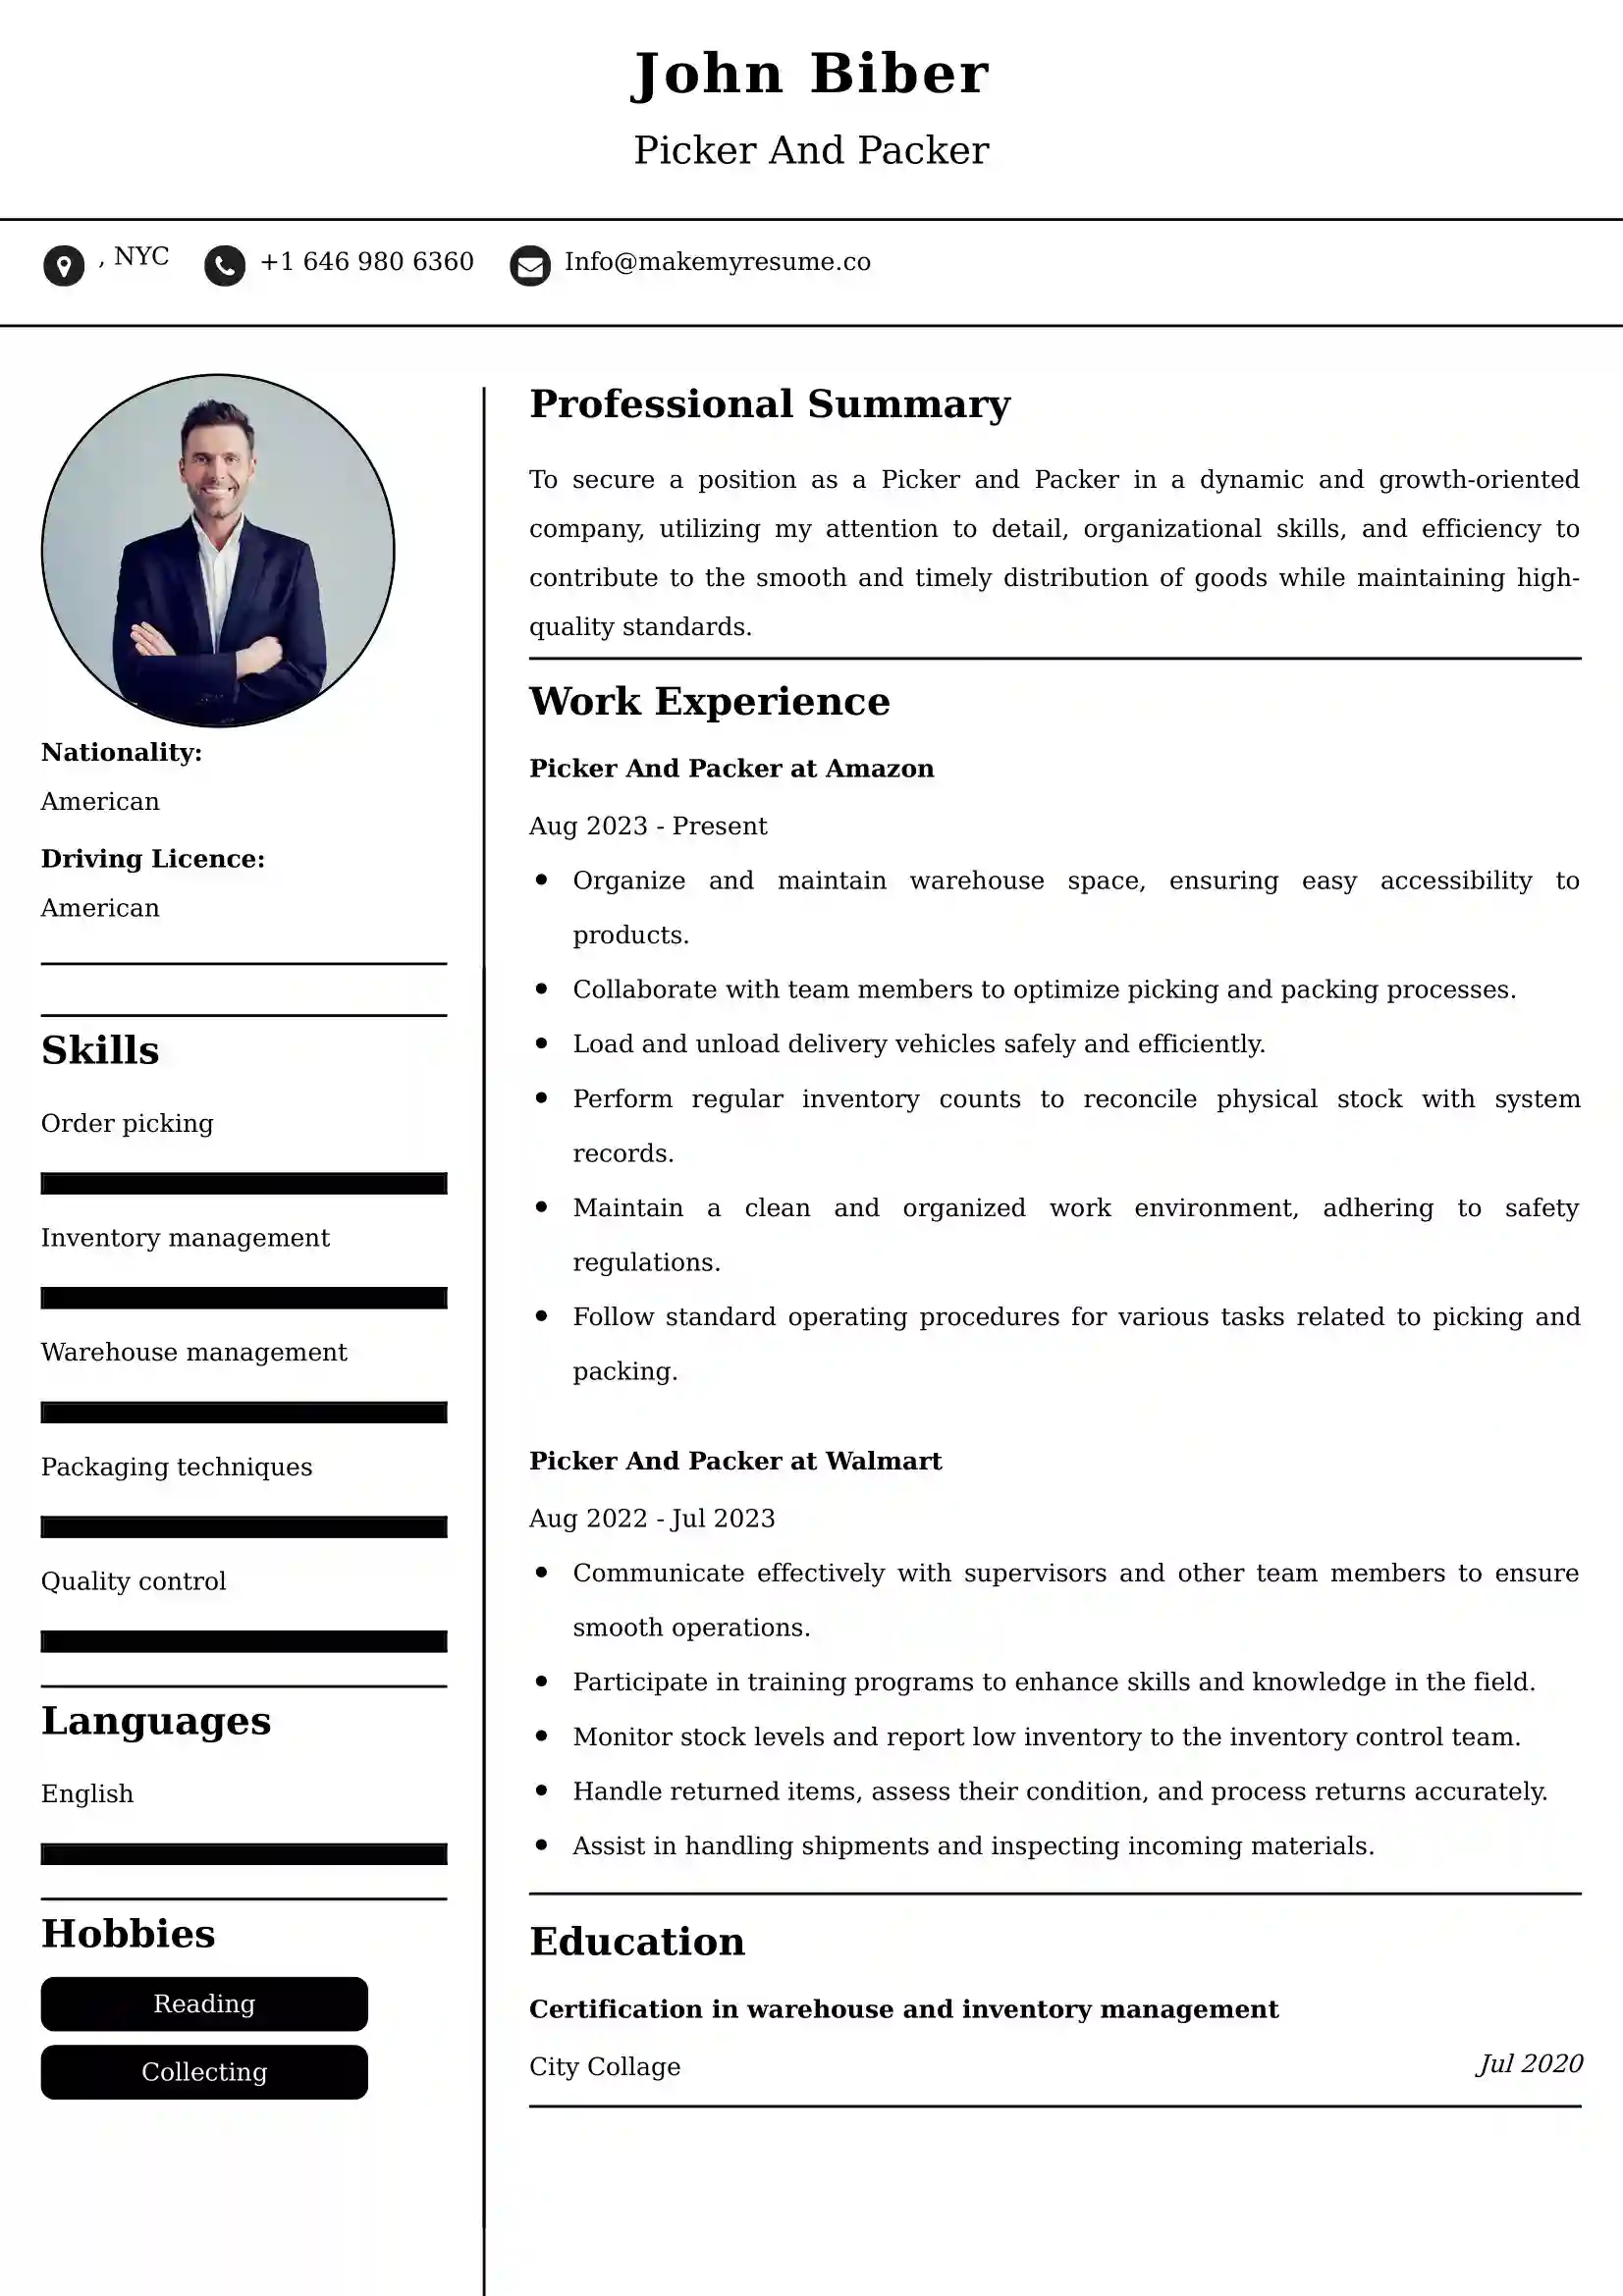 Picker And Packer Resume Examples - Australian Format and Tips